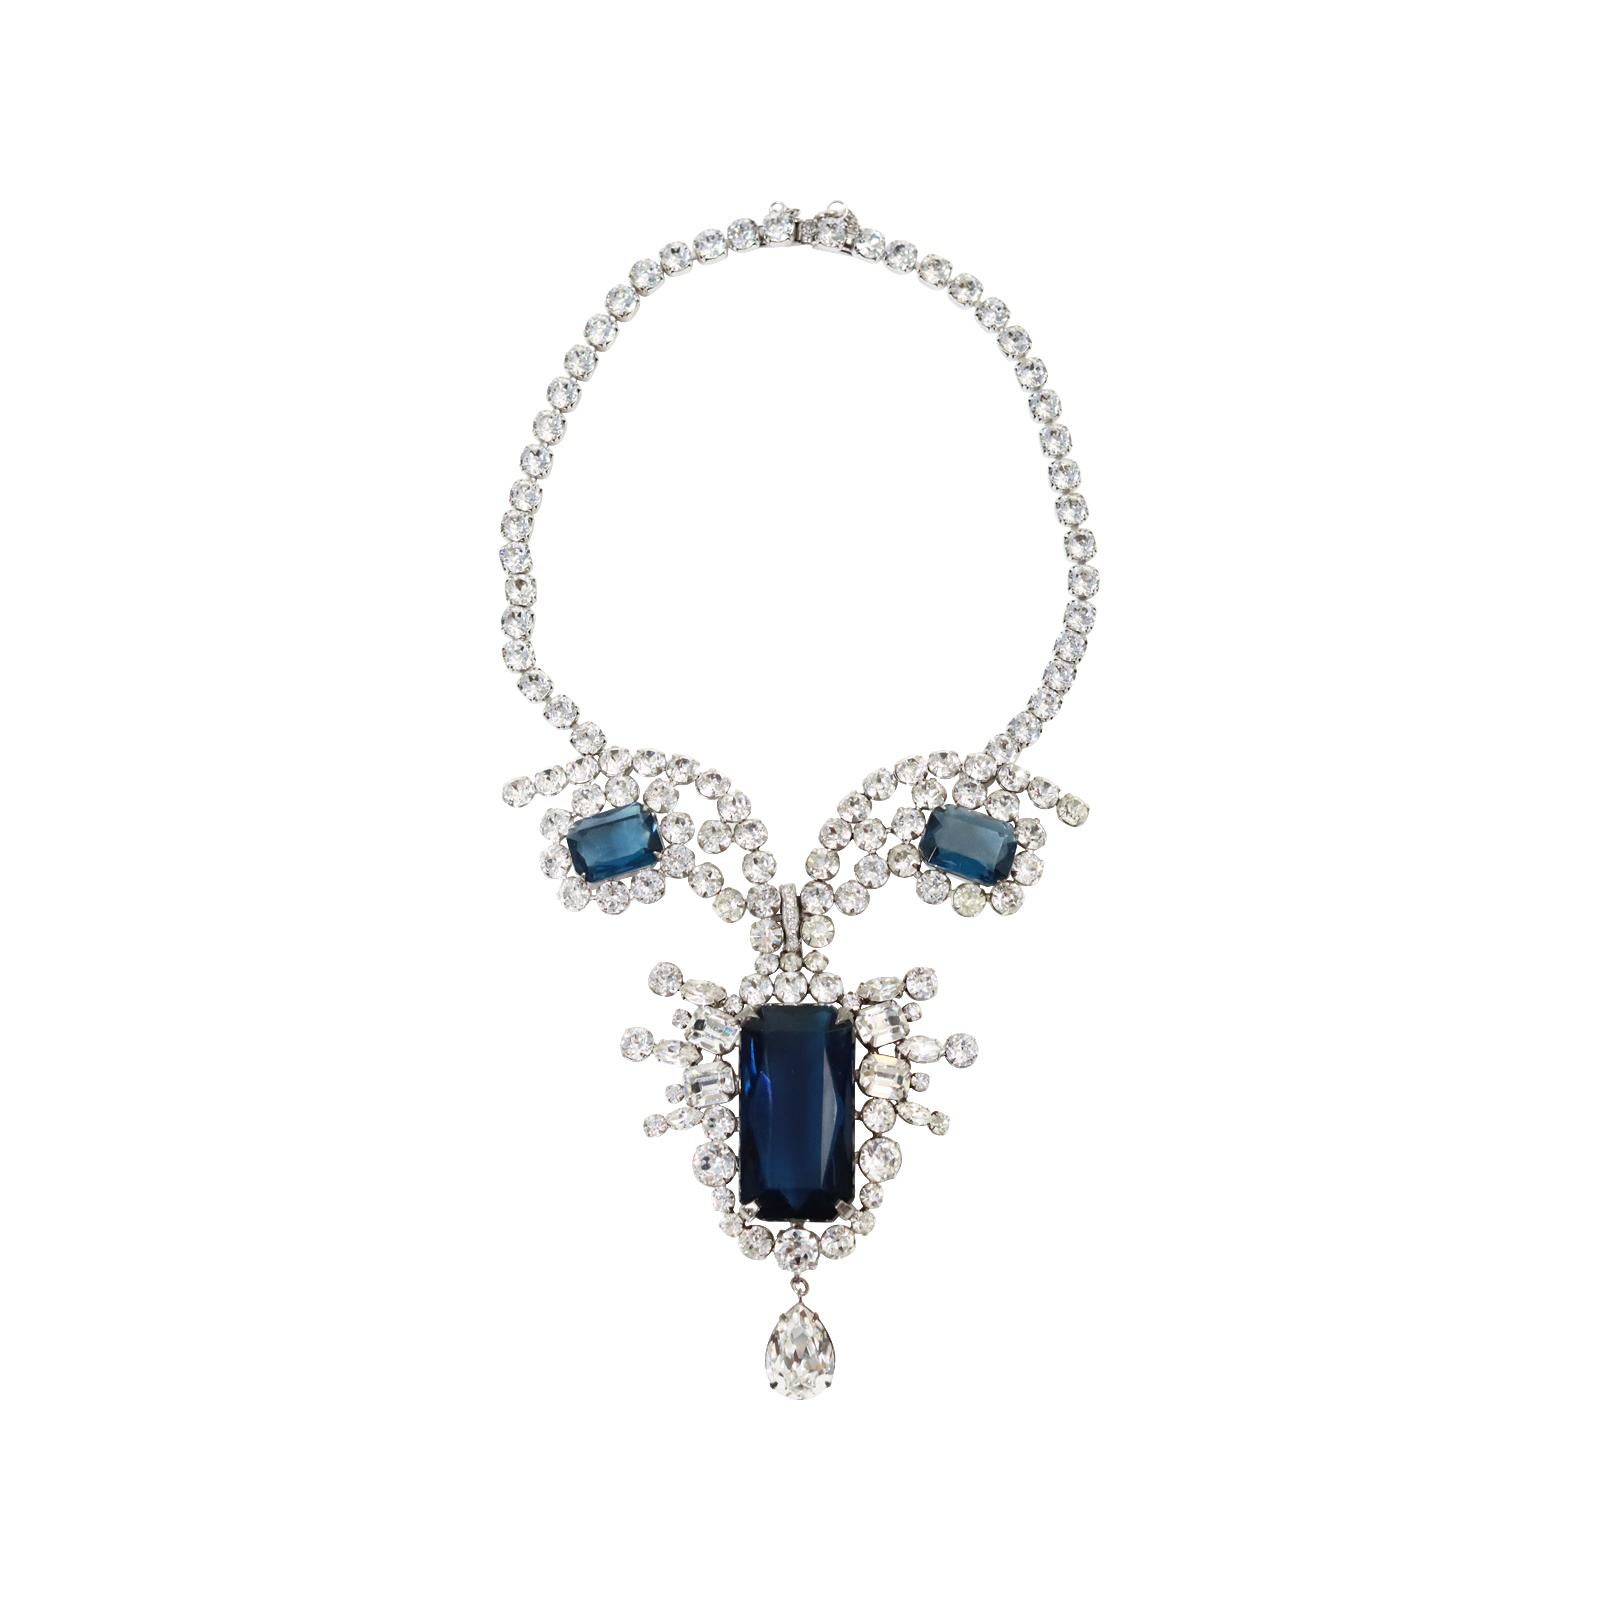 Vintage Diamante and Sapphire Drop Necklace Circa 1980's.  This reminds me of something that princess Diana wore. There are small prong set round stones around the neck that  gather with two round sapphire stones which join to form a giant sapphire